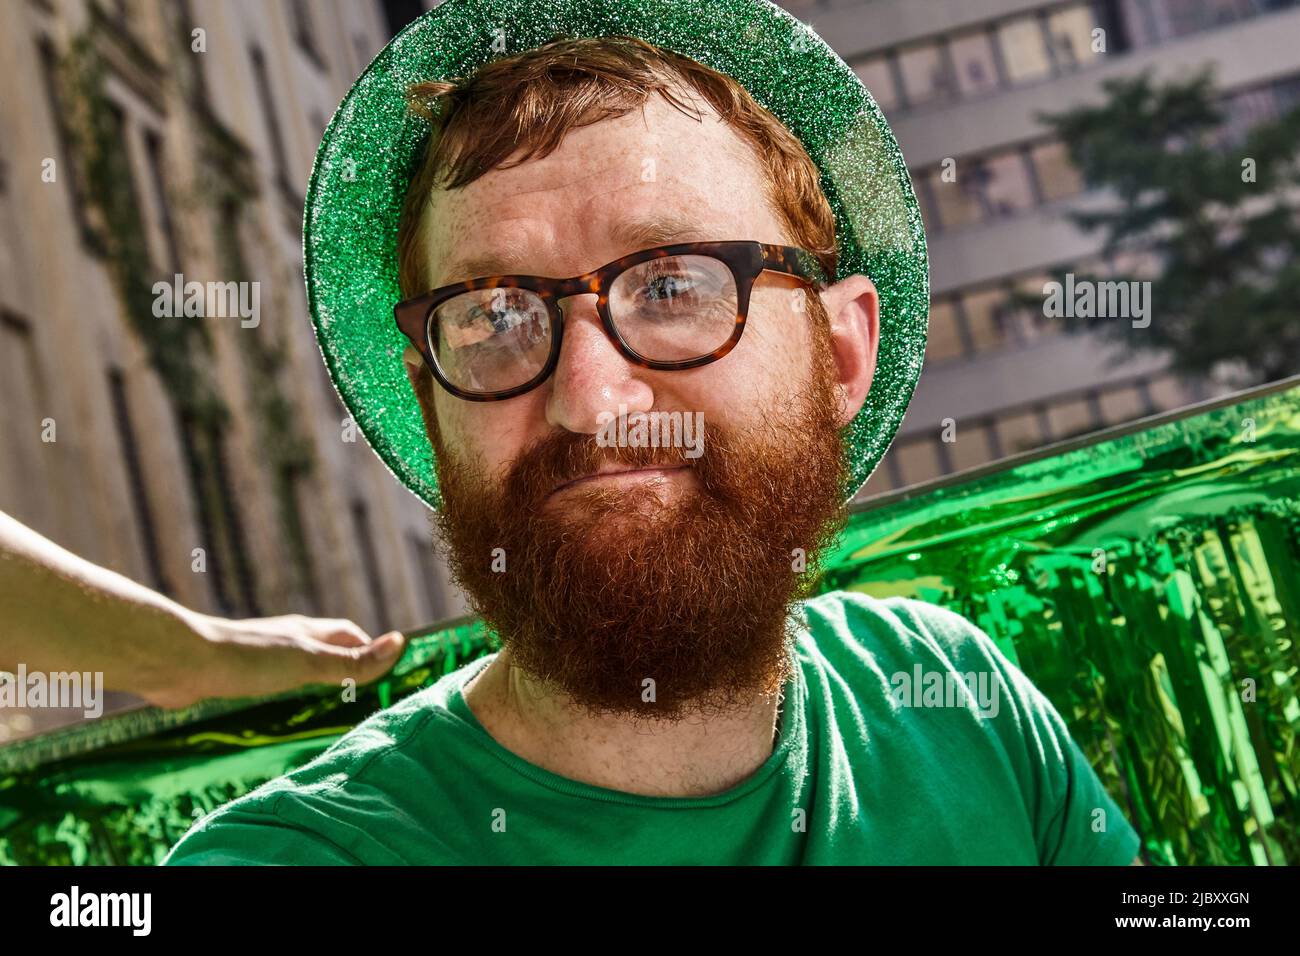 Redheaded man wearing green hat and shirt at St Patrick's Day Party Stock Photo